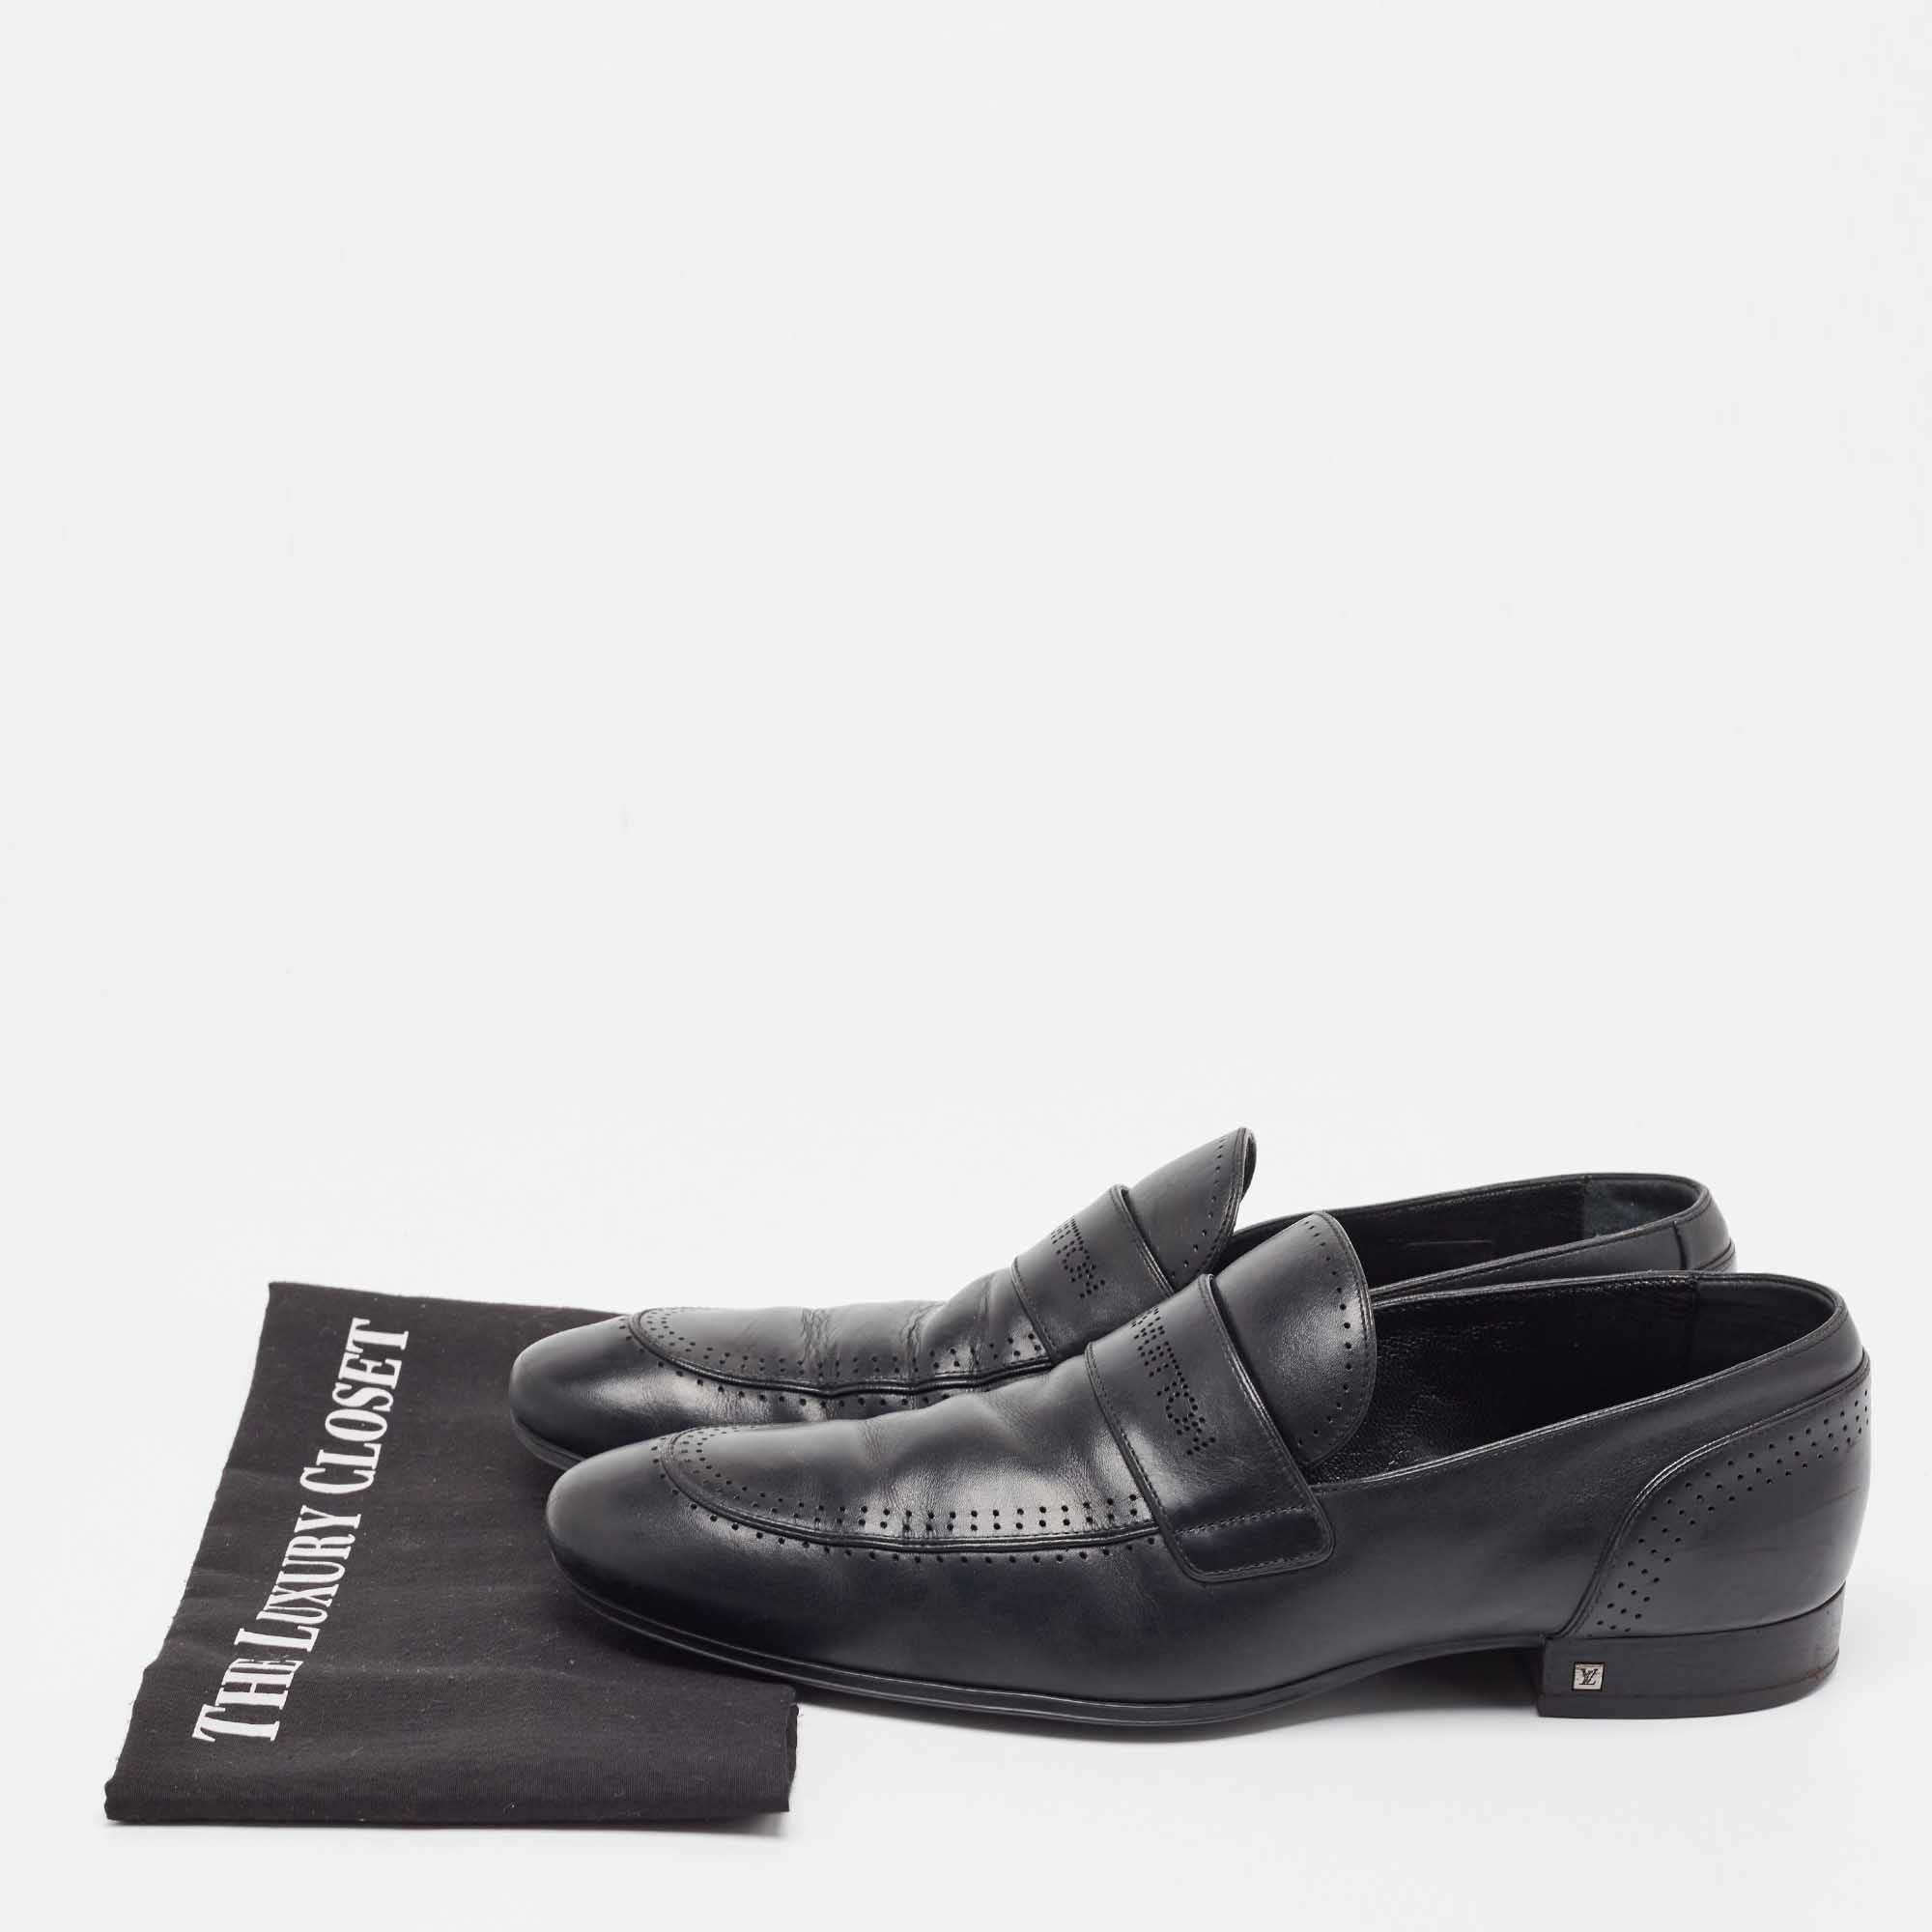 Louis Vuitton Black Leather Slip On Loafers Size 43